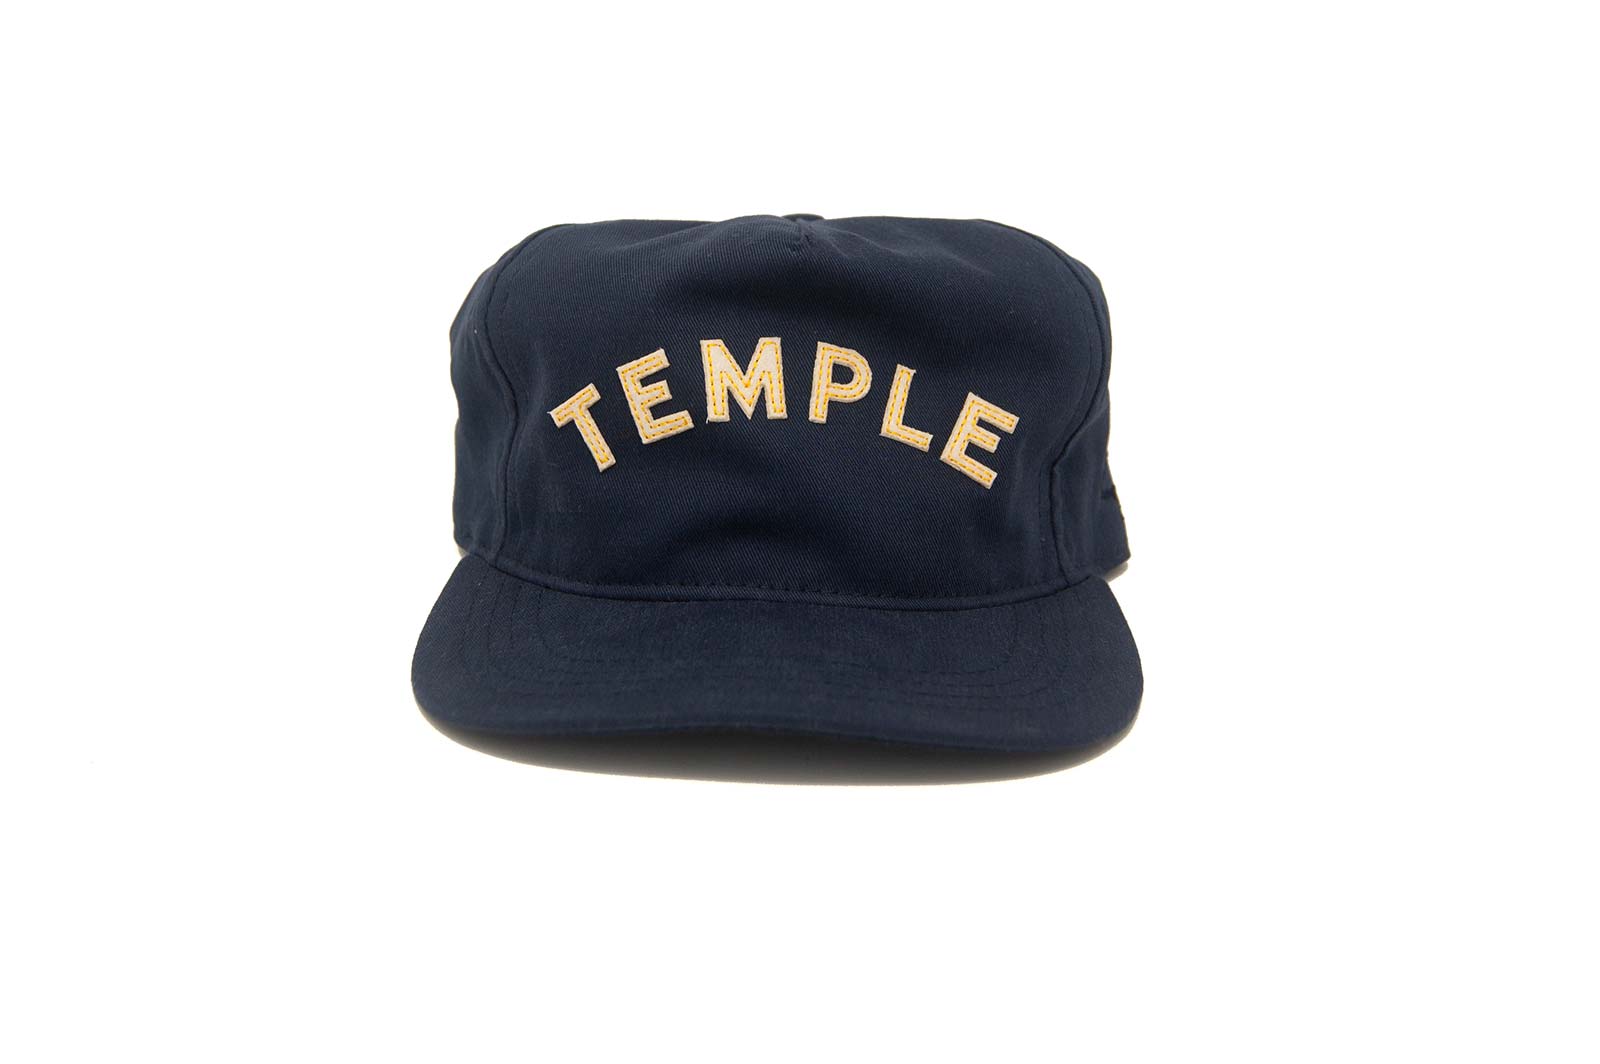 Ampal x TEMPLE CHOPPERS Strapback